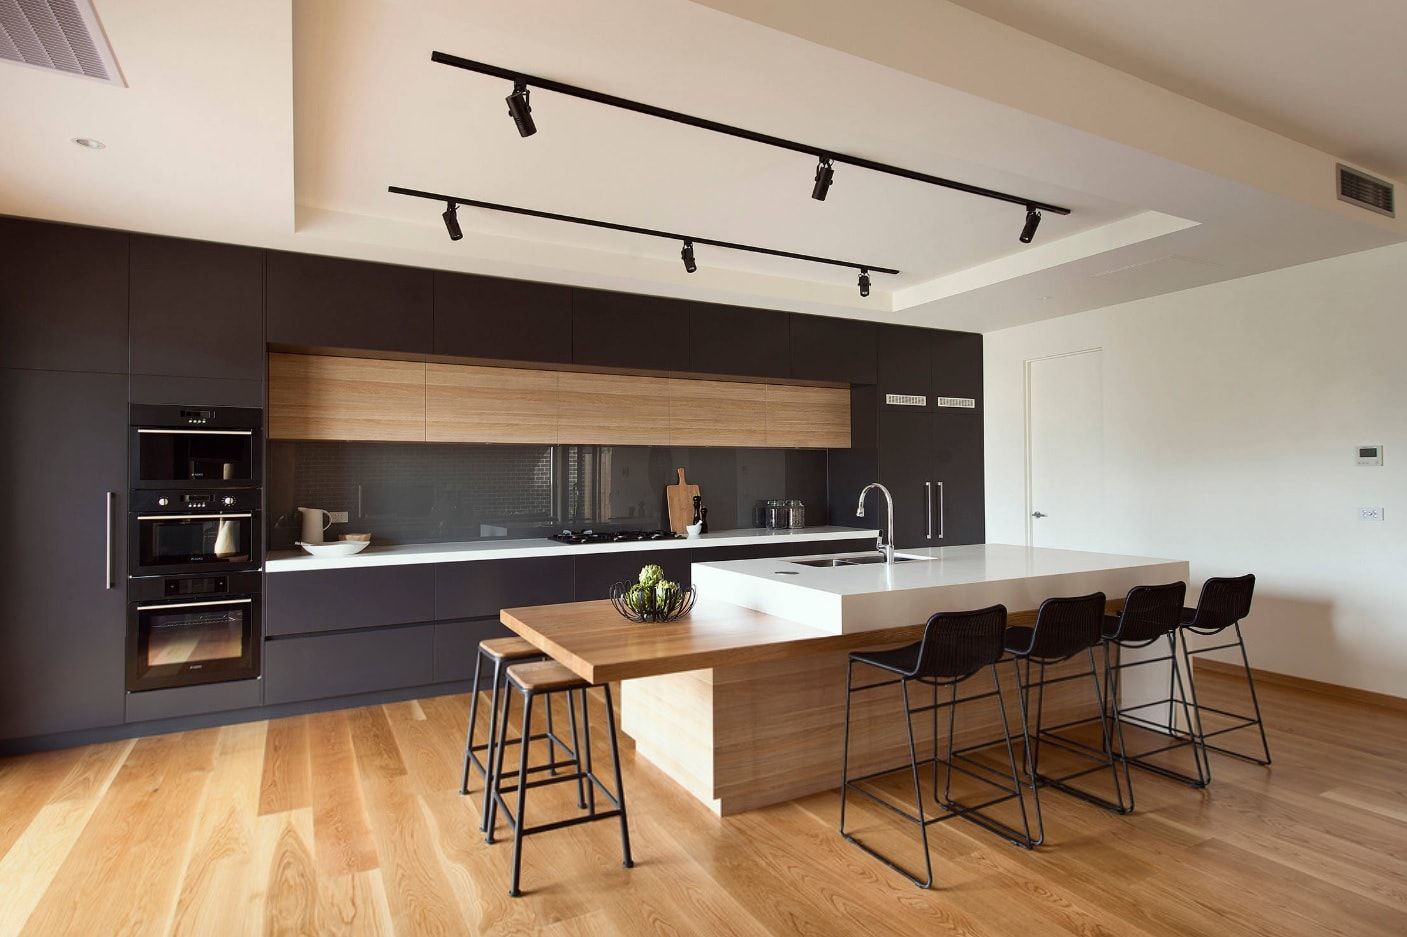 Black rods at the ceiling for lighting fixtures and wooden trimming for contrasting modern kitchen